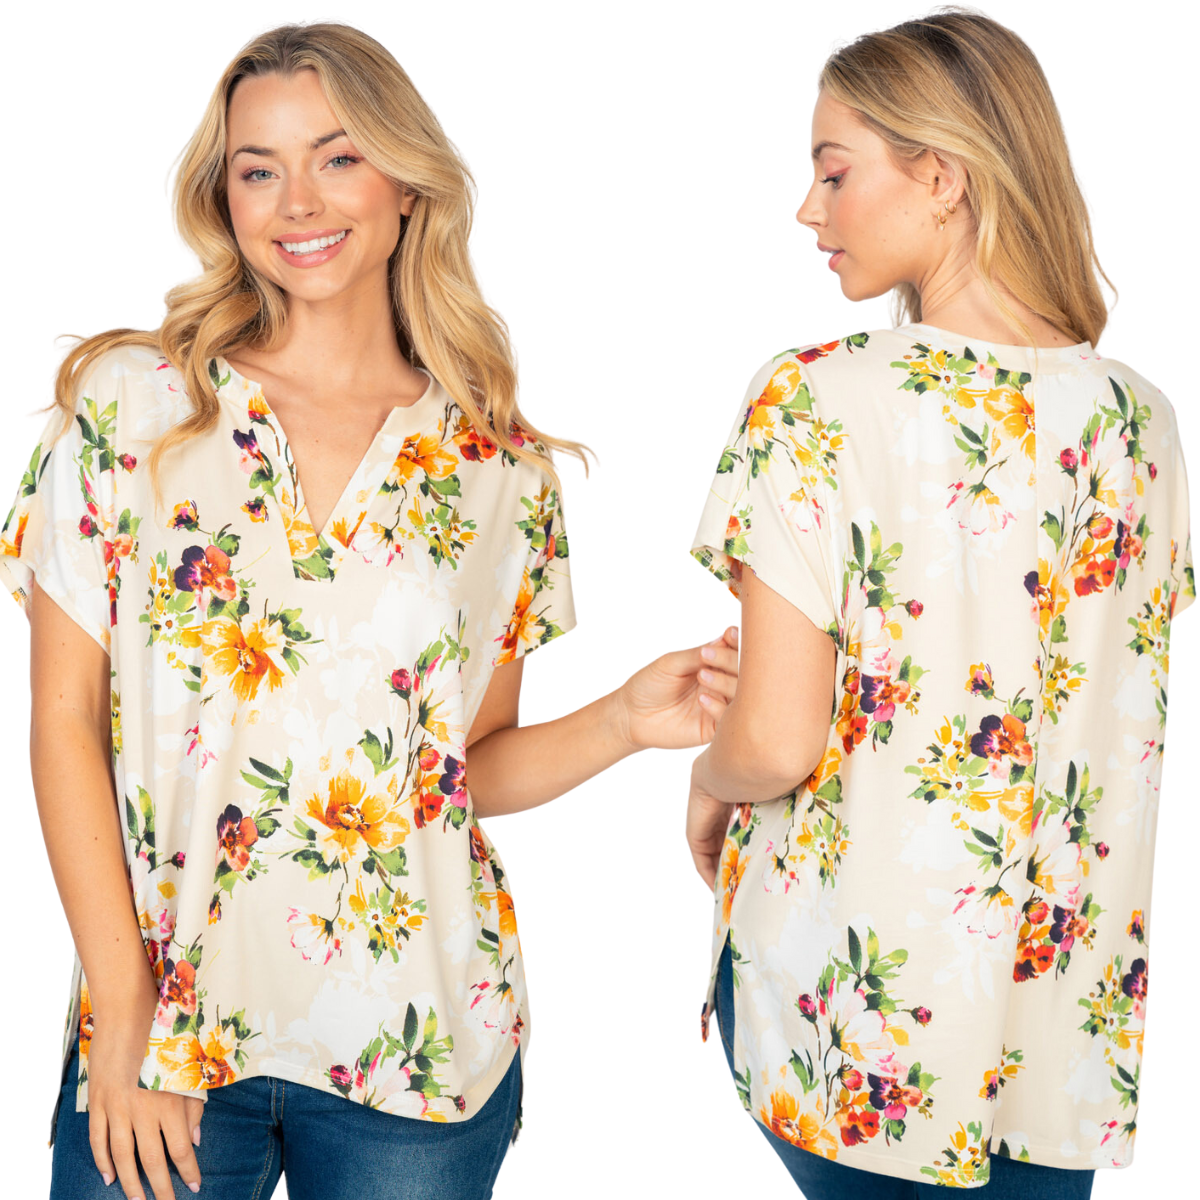 A woman wearing a Floral Print Short Sleeve Top by FASHION GO.